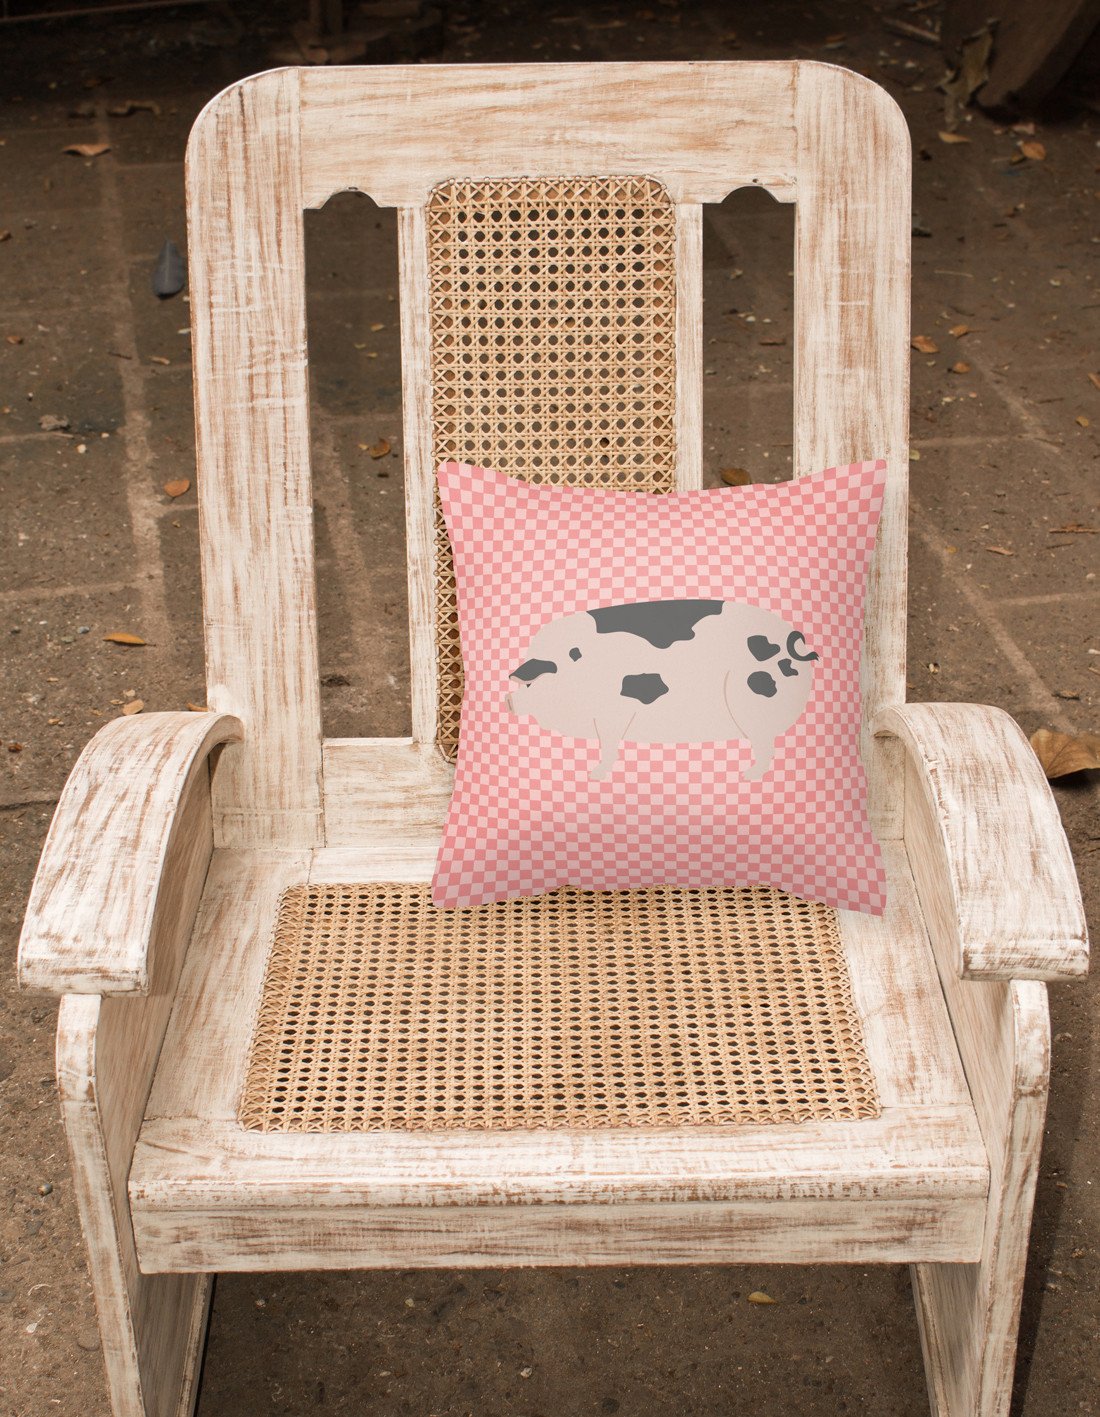 Gloucester Old Spot Pig Pink Check Fabric Decorative Pillow BB7940PW1818 by Caroline's Treasures